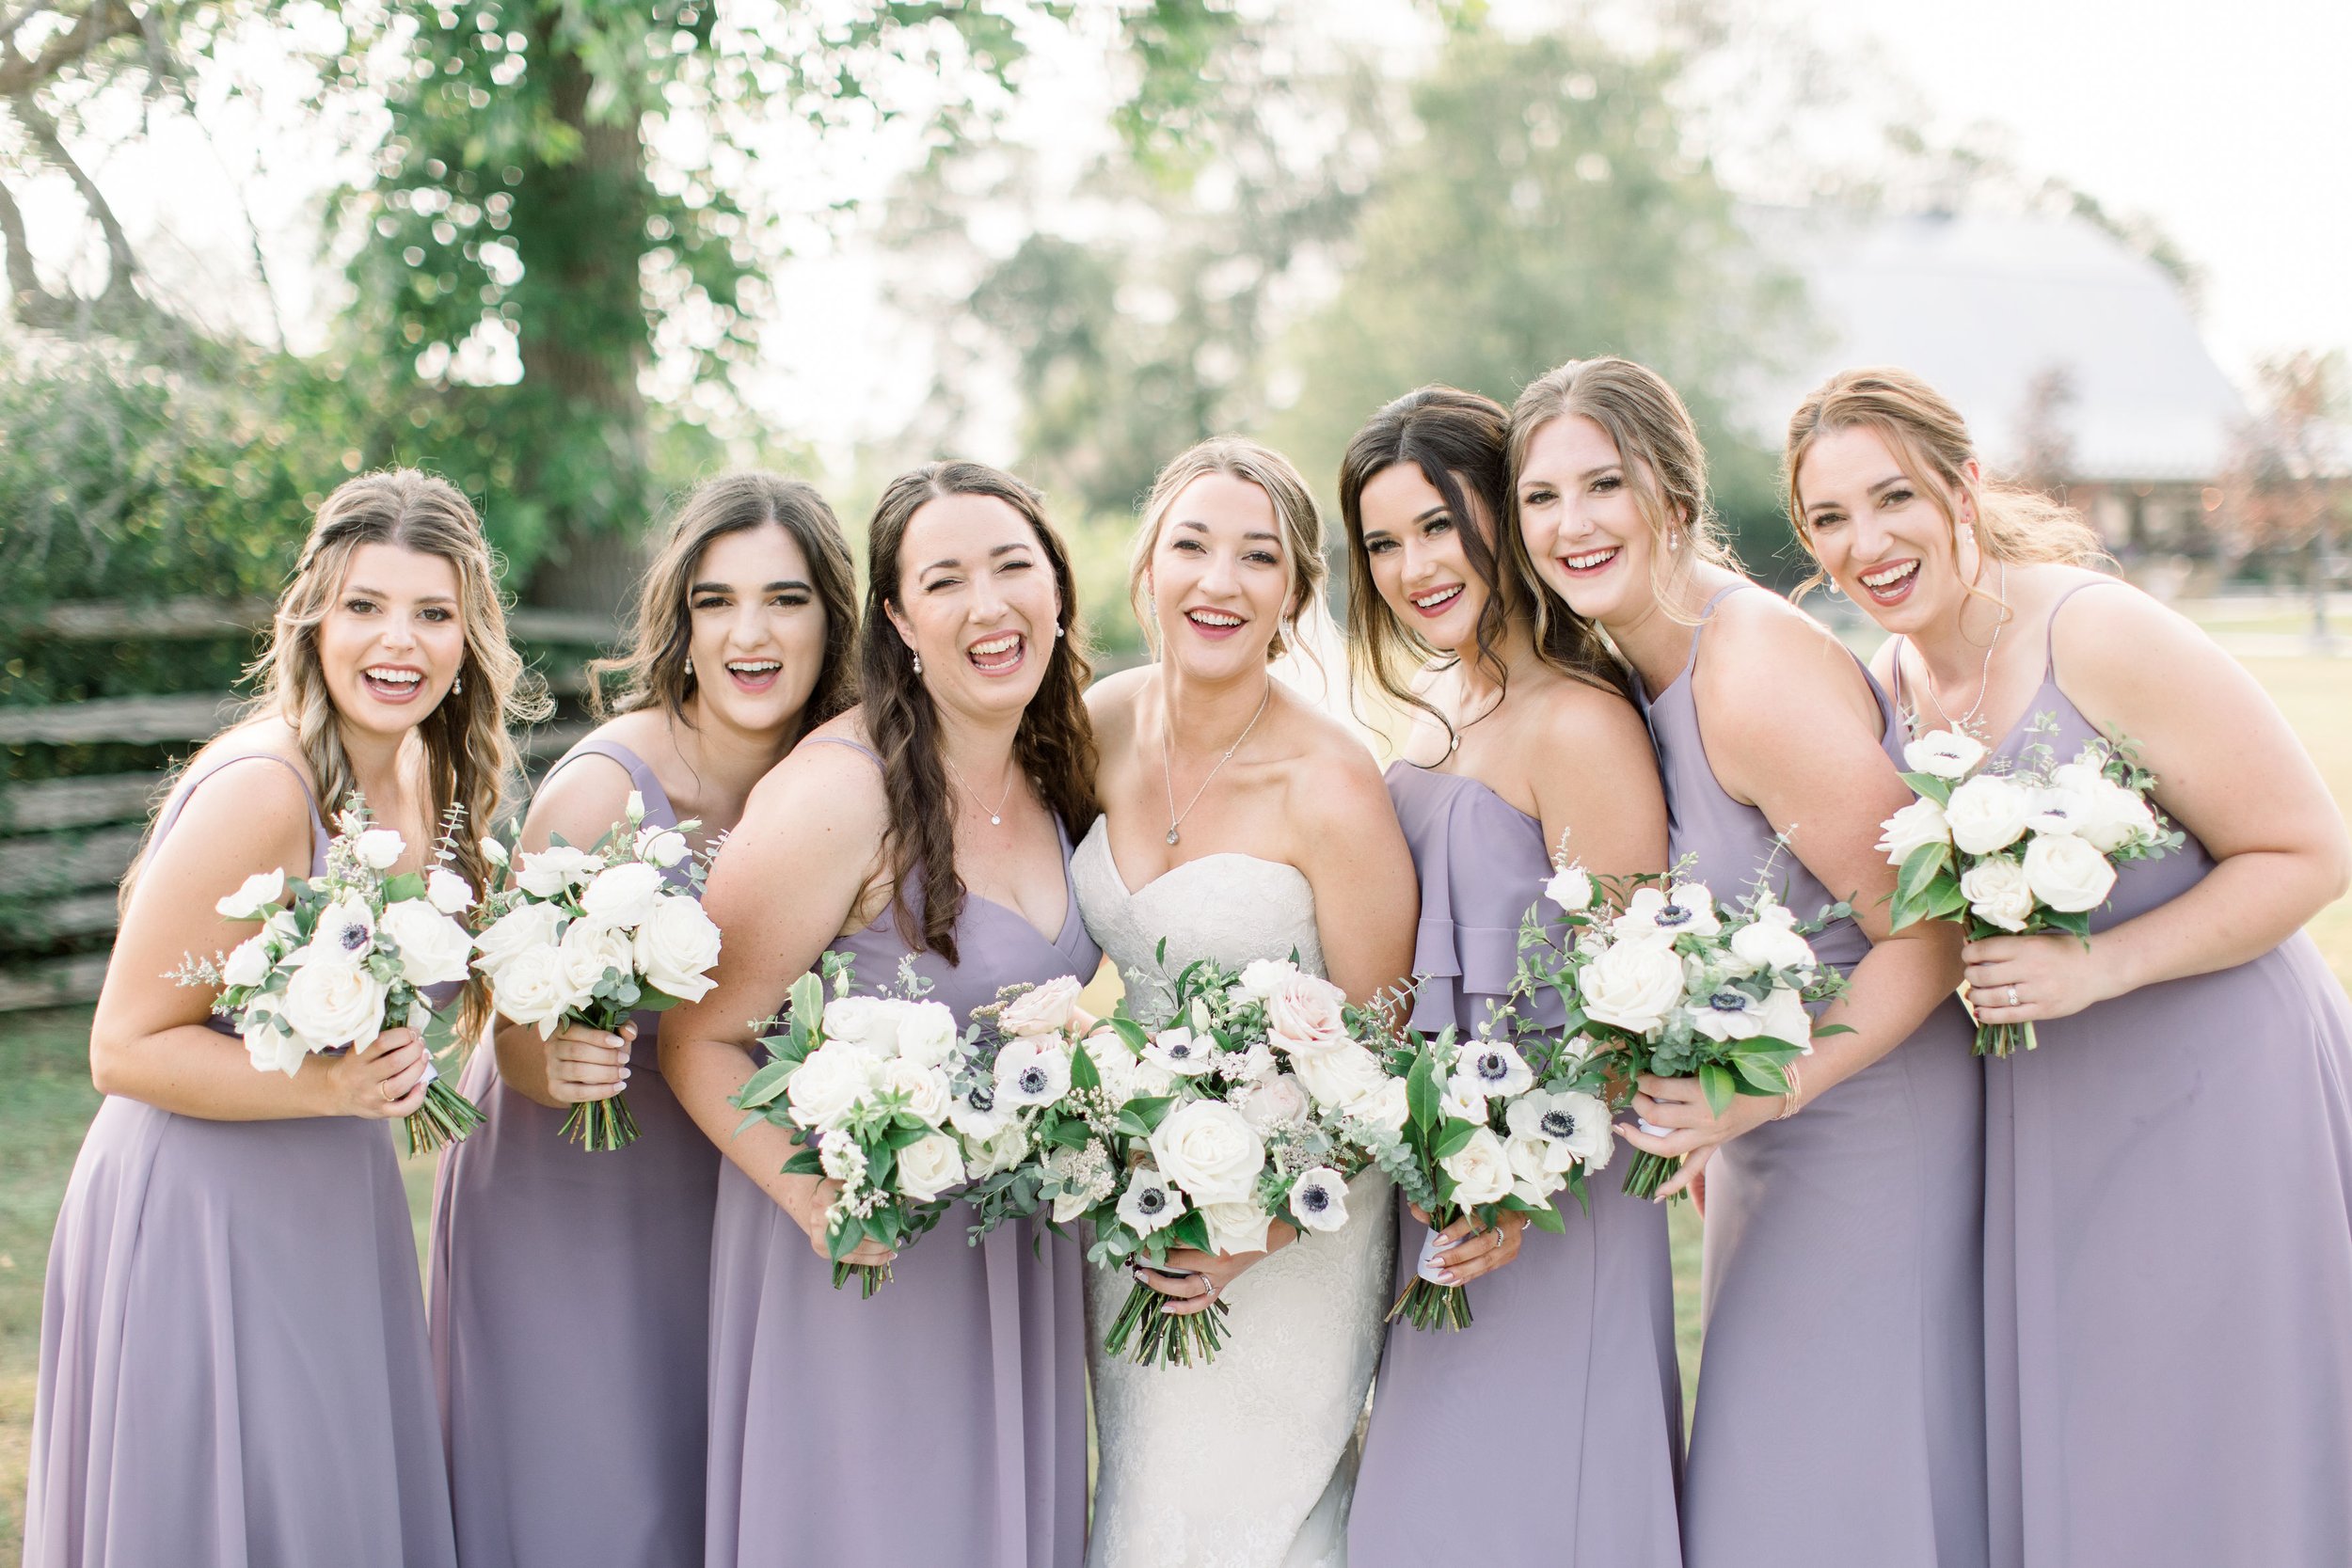  Bridesmaids wearing lilac dresses for a wedding at Stonefield Estates in Ontario by Chelsea Mason Photography. bridesmaid goals #StonefieldEstates #Ontarioweddings #Chelseamasonphotography #Chelseamasonengagements #Ontarioweddingphotographers 